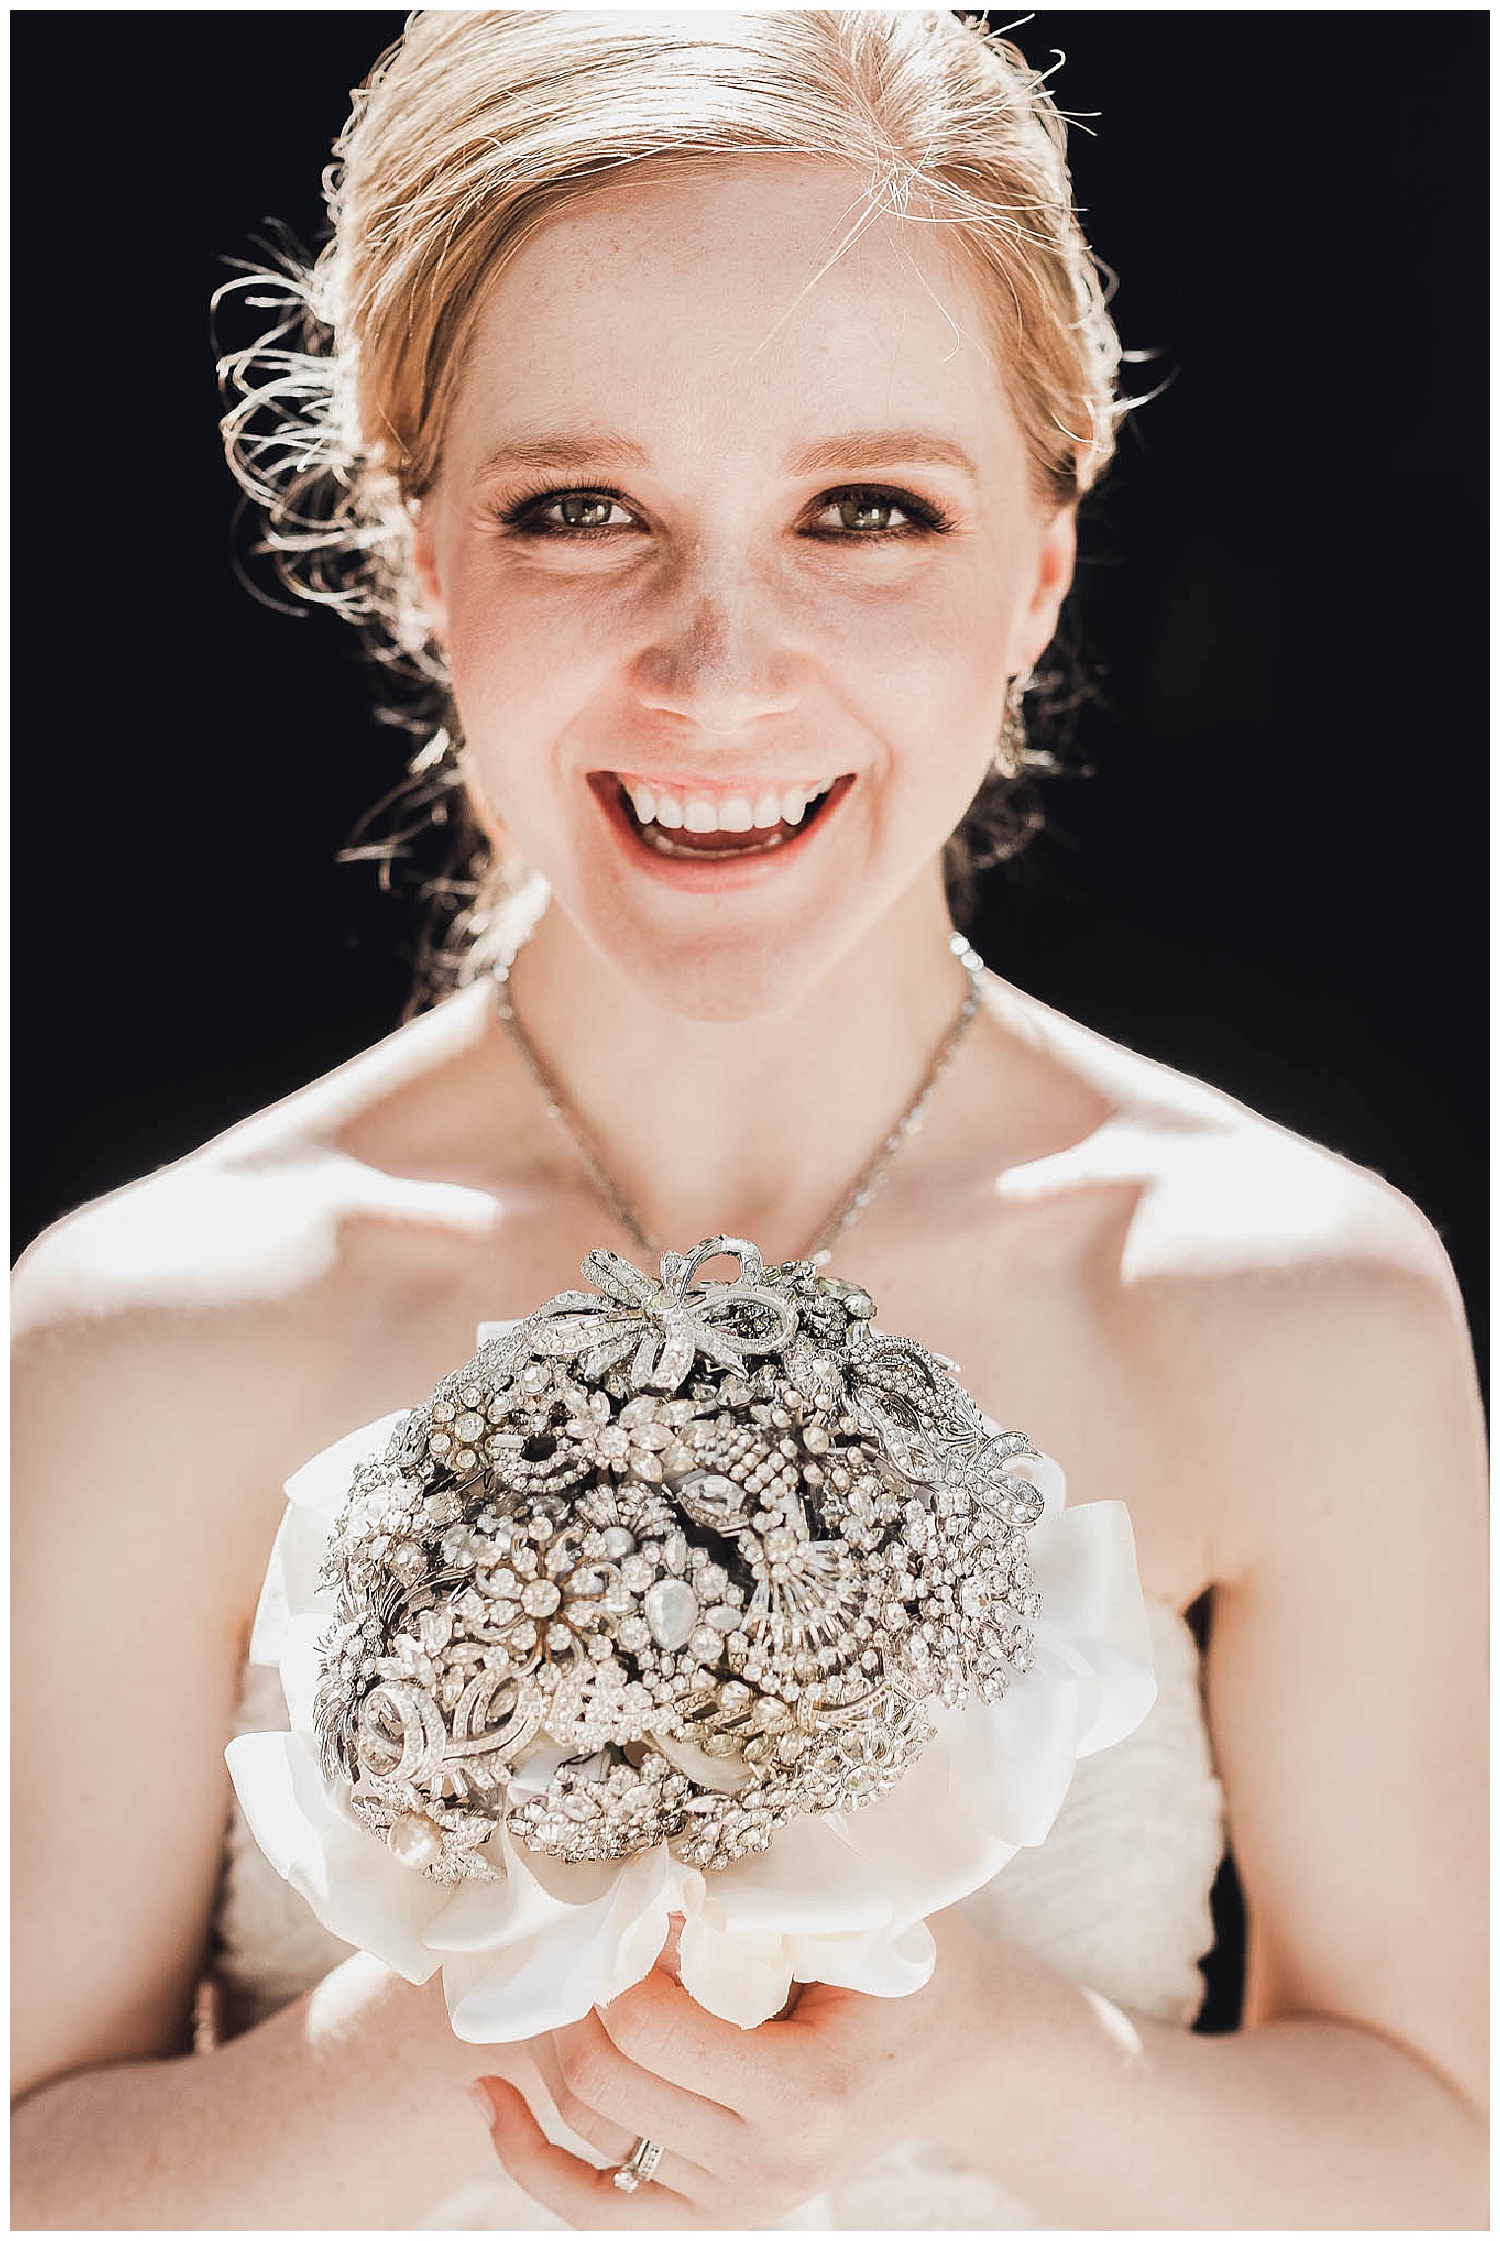 Luxury bridal session by Seattle and Snohomish Wedding Photographer Kyle Goldie of Luma Weddings